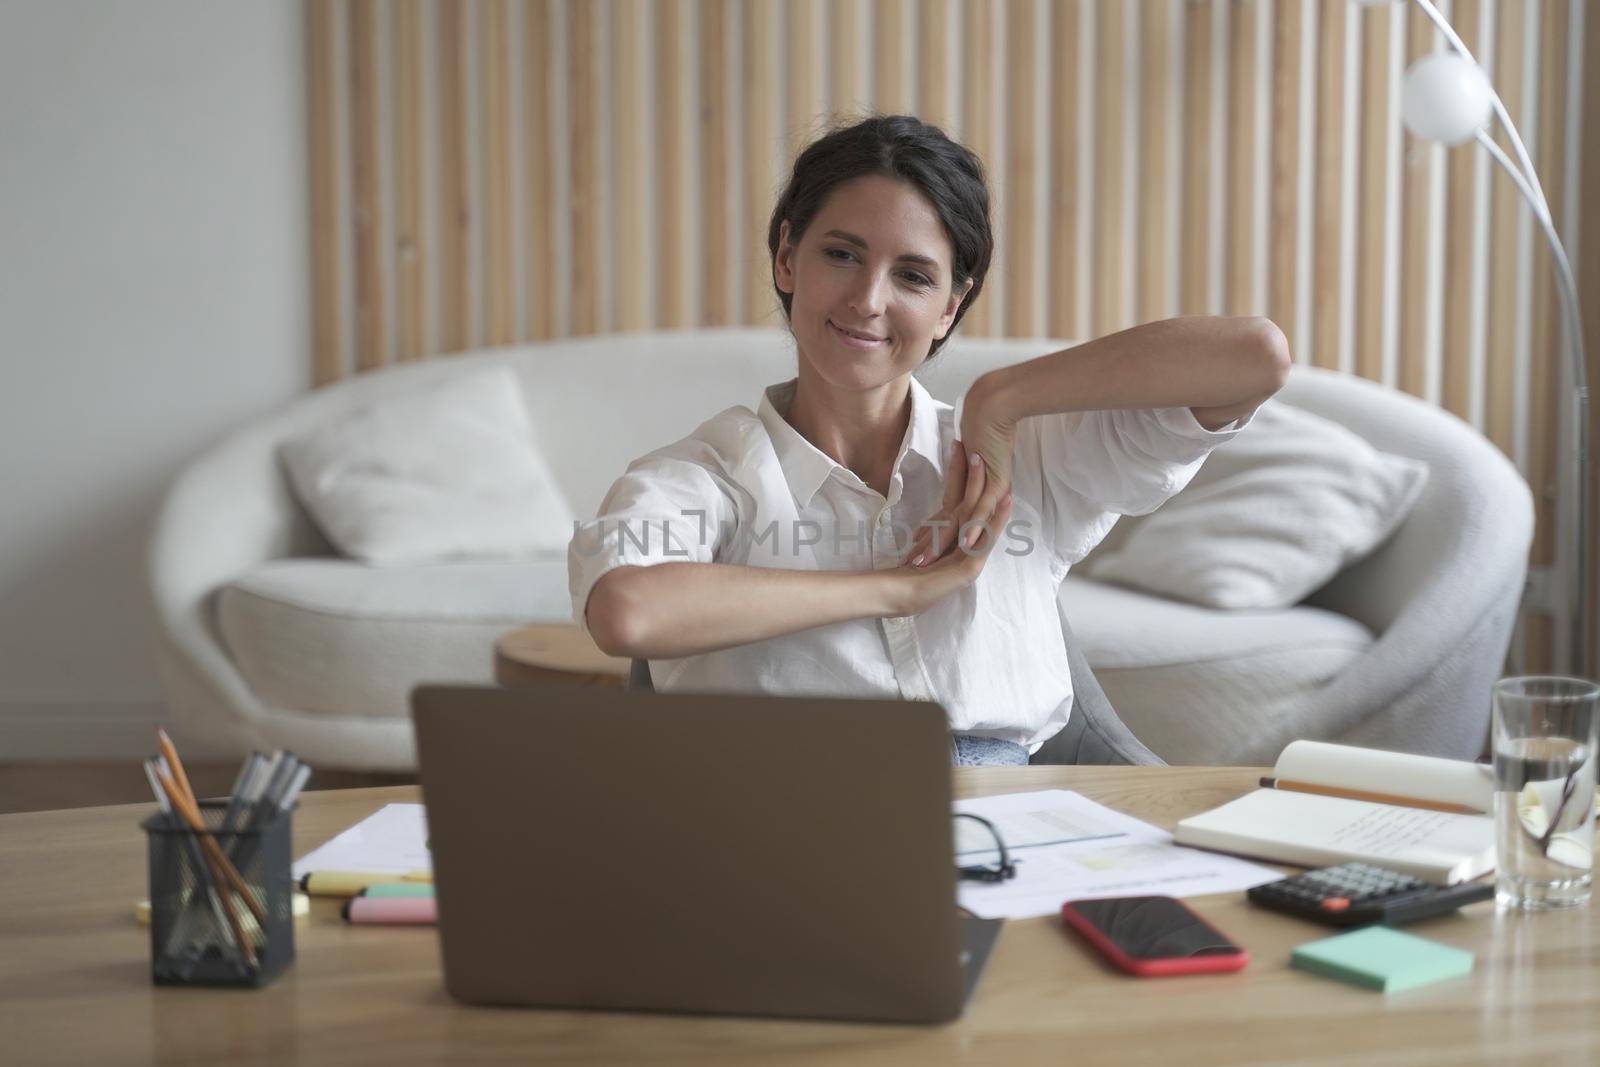 Positive business woman doing hands and fingers stretching exercises while listening to training lectures during webinar online on laptop. Freelancer lady broadly smiling as looking at computer screen